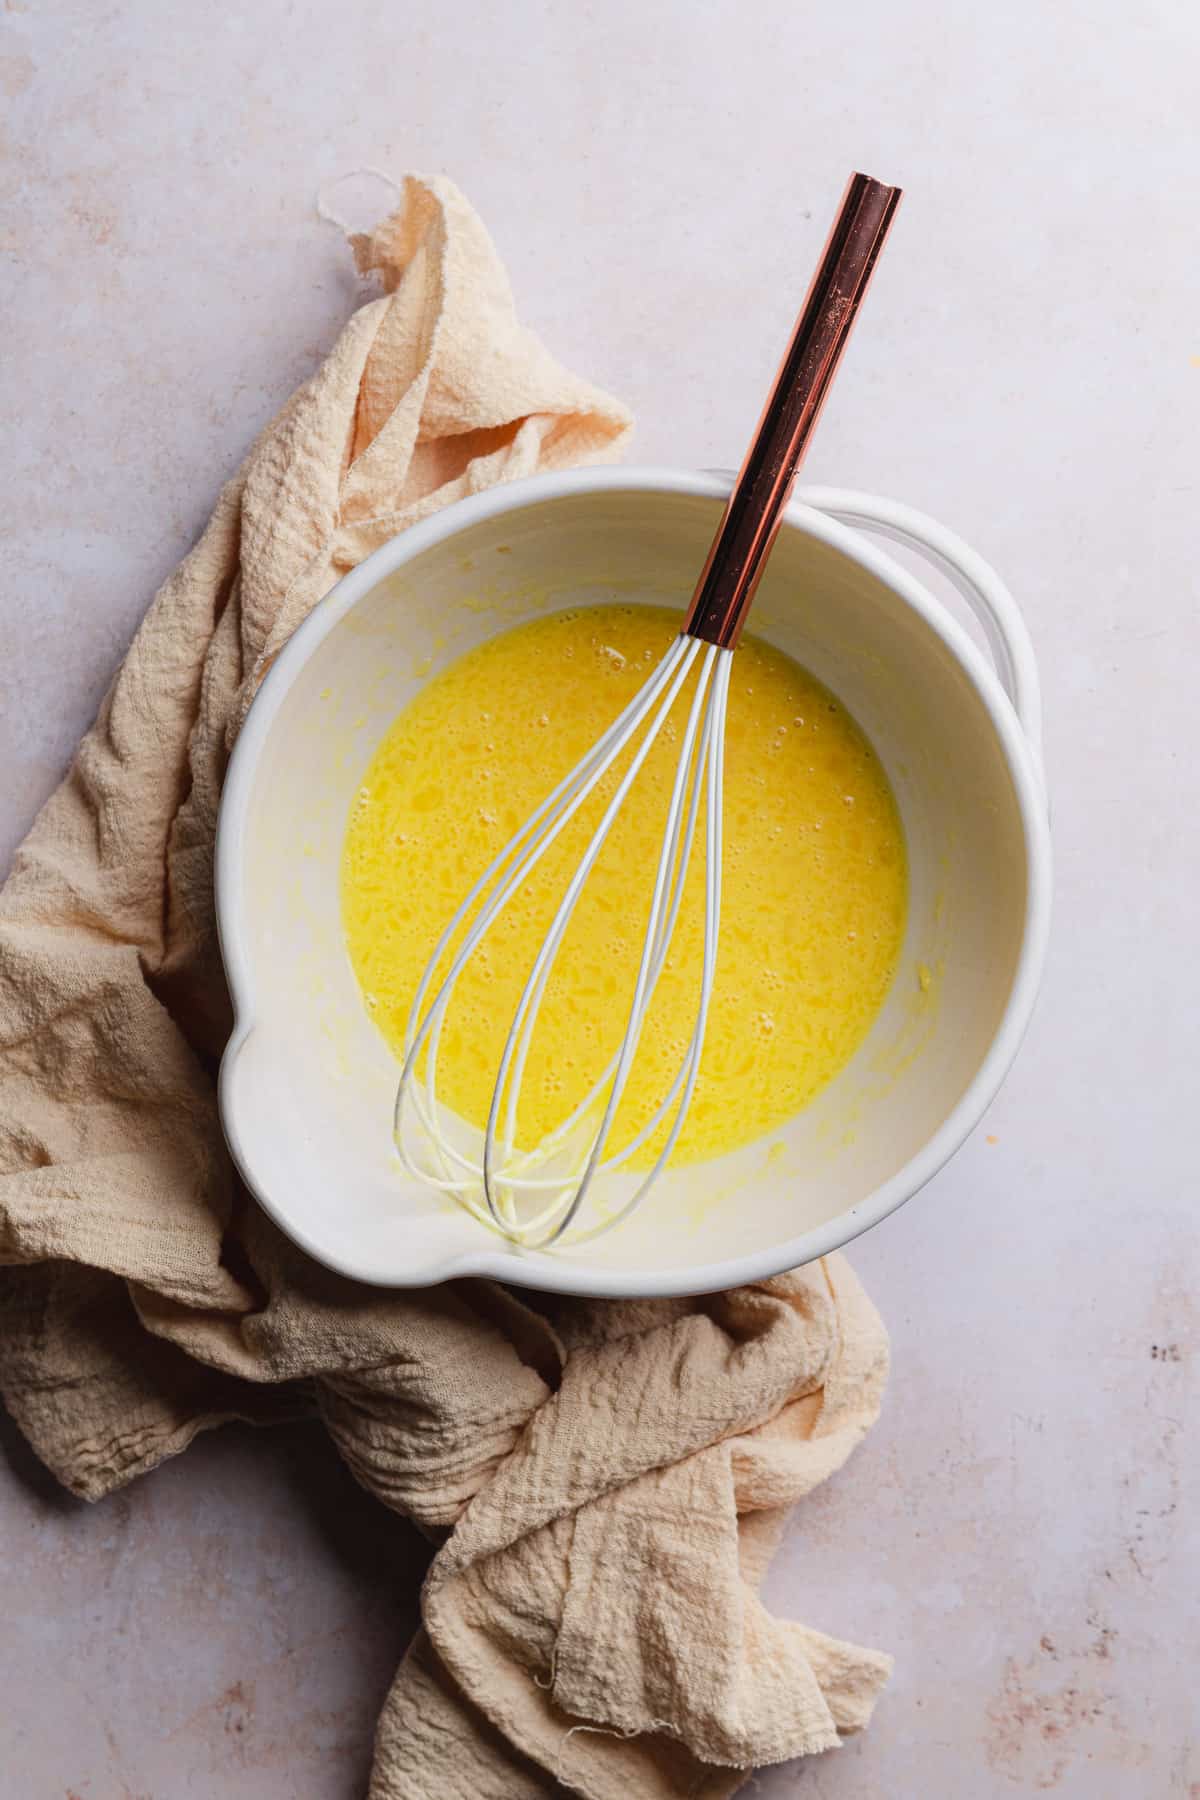 whisked eggs, vanilla, melted butter and milk in a ceramic mixing bowl